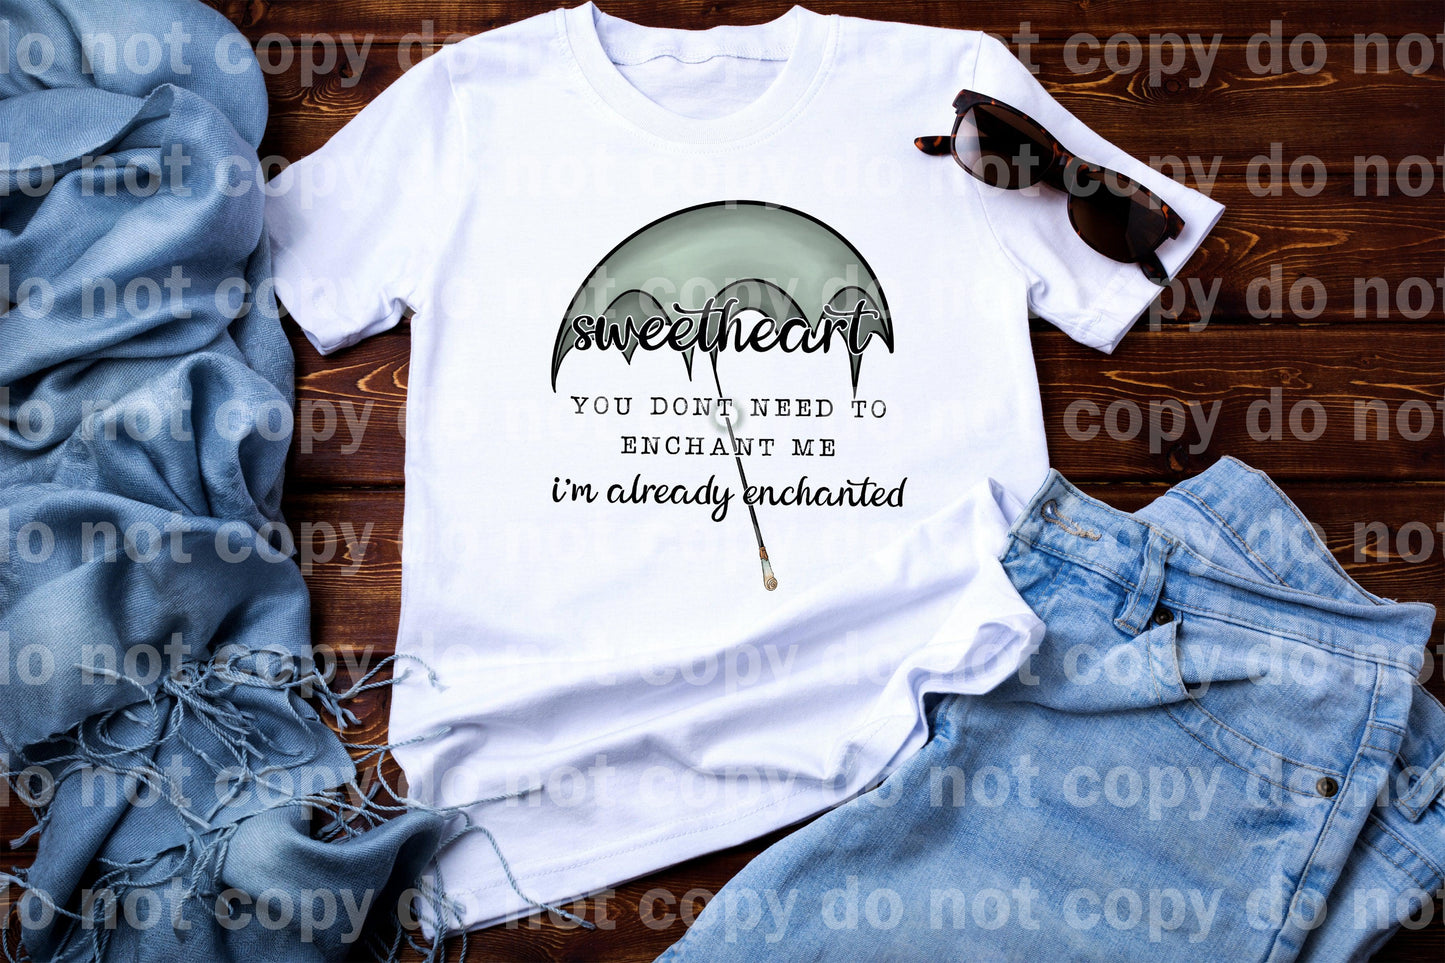 Sweetheart You Don't Need To Enchant Me I'm Already Ready Enchanted Umbrella Dream Print or Sublimation Print